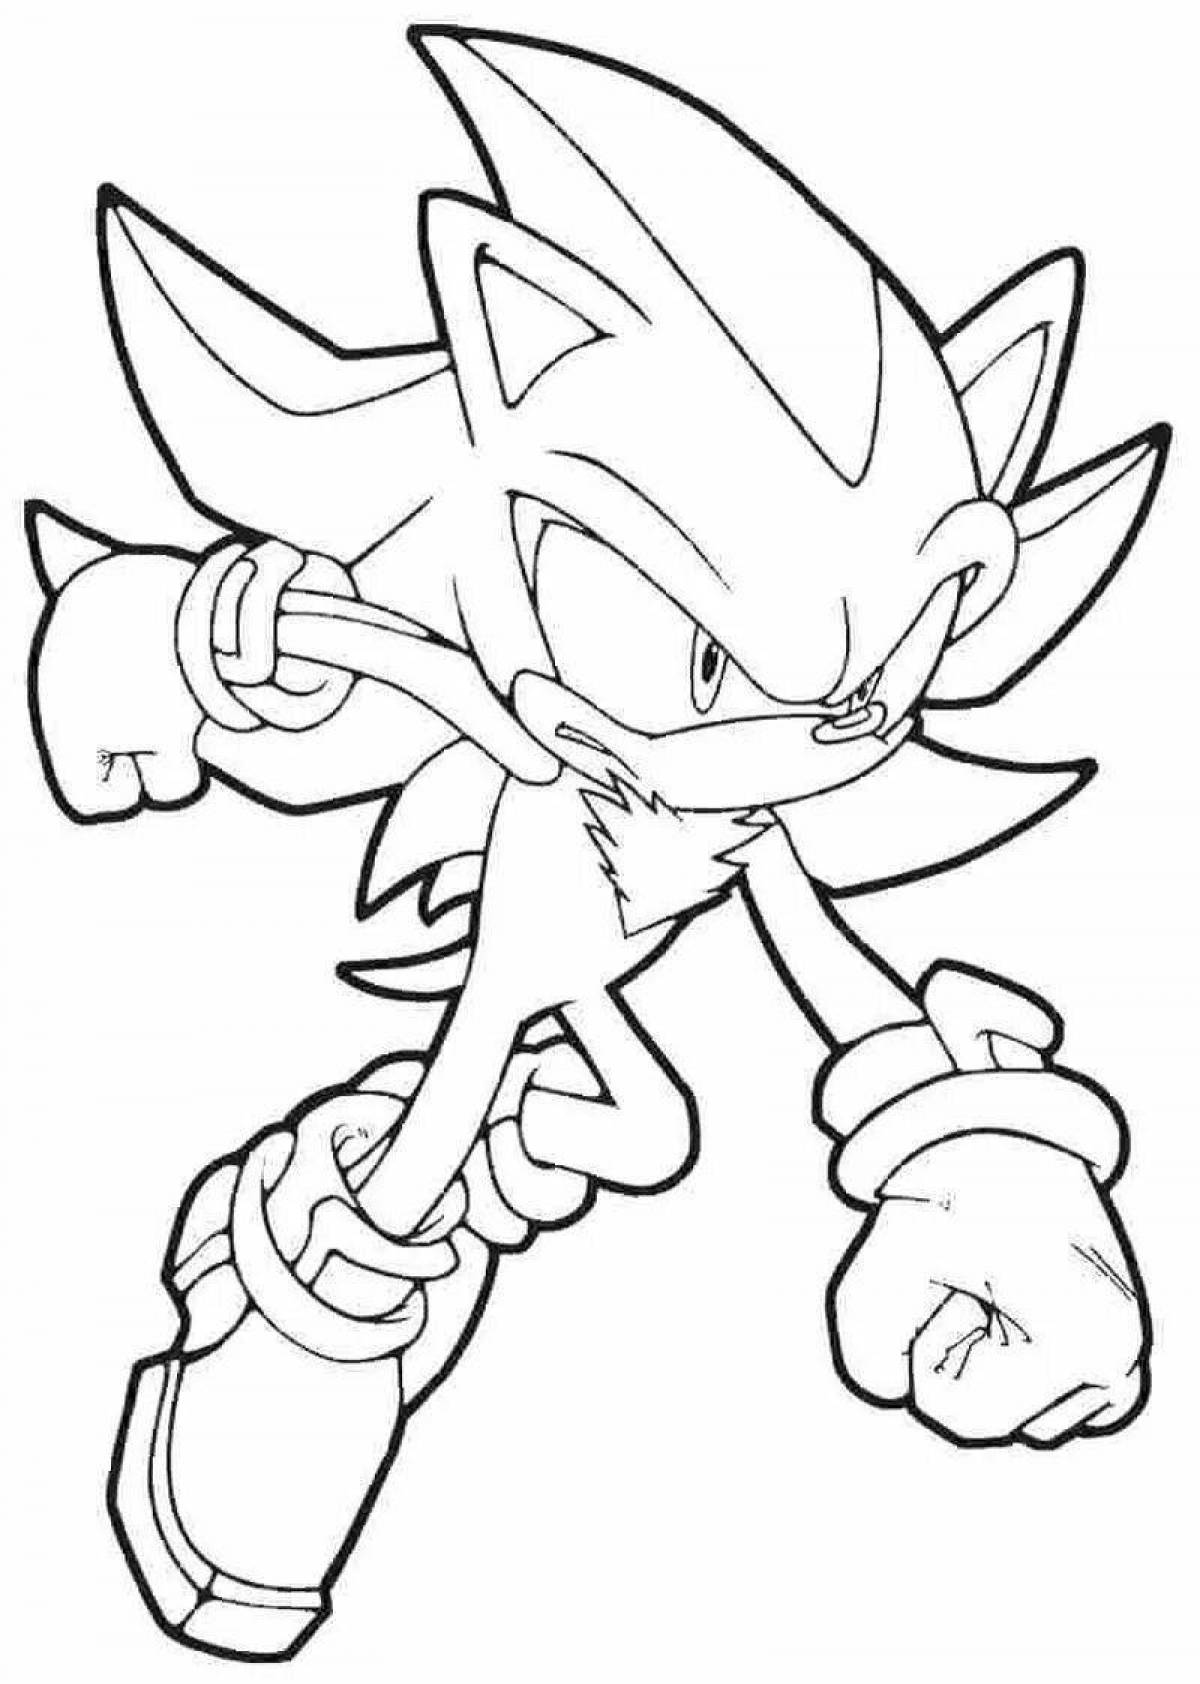 Hyper sonic animated coloring page